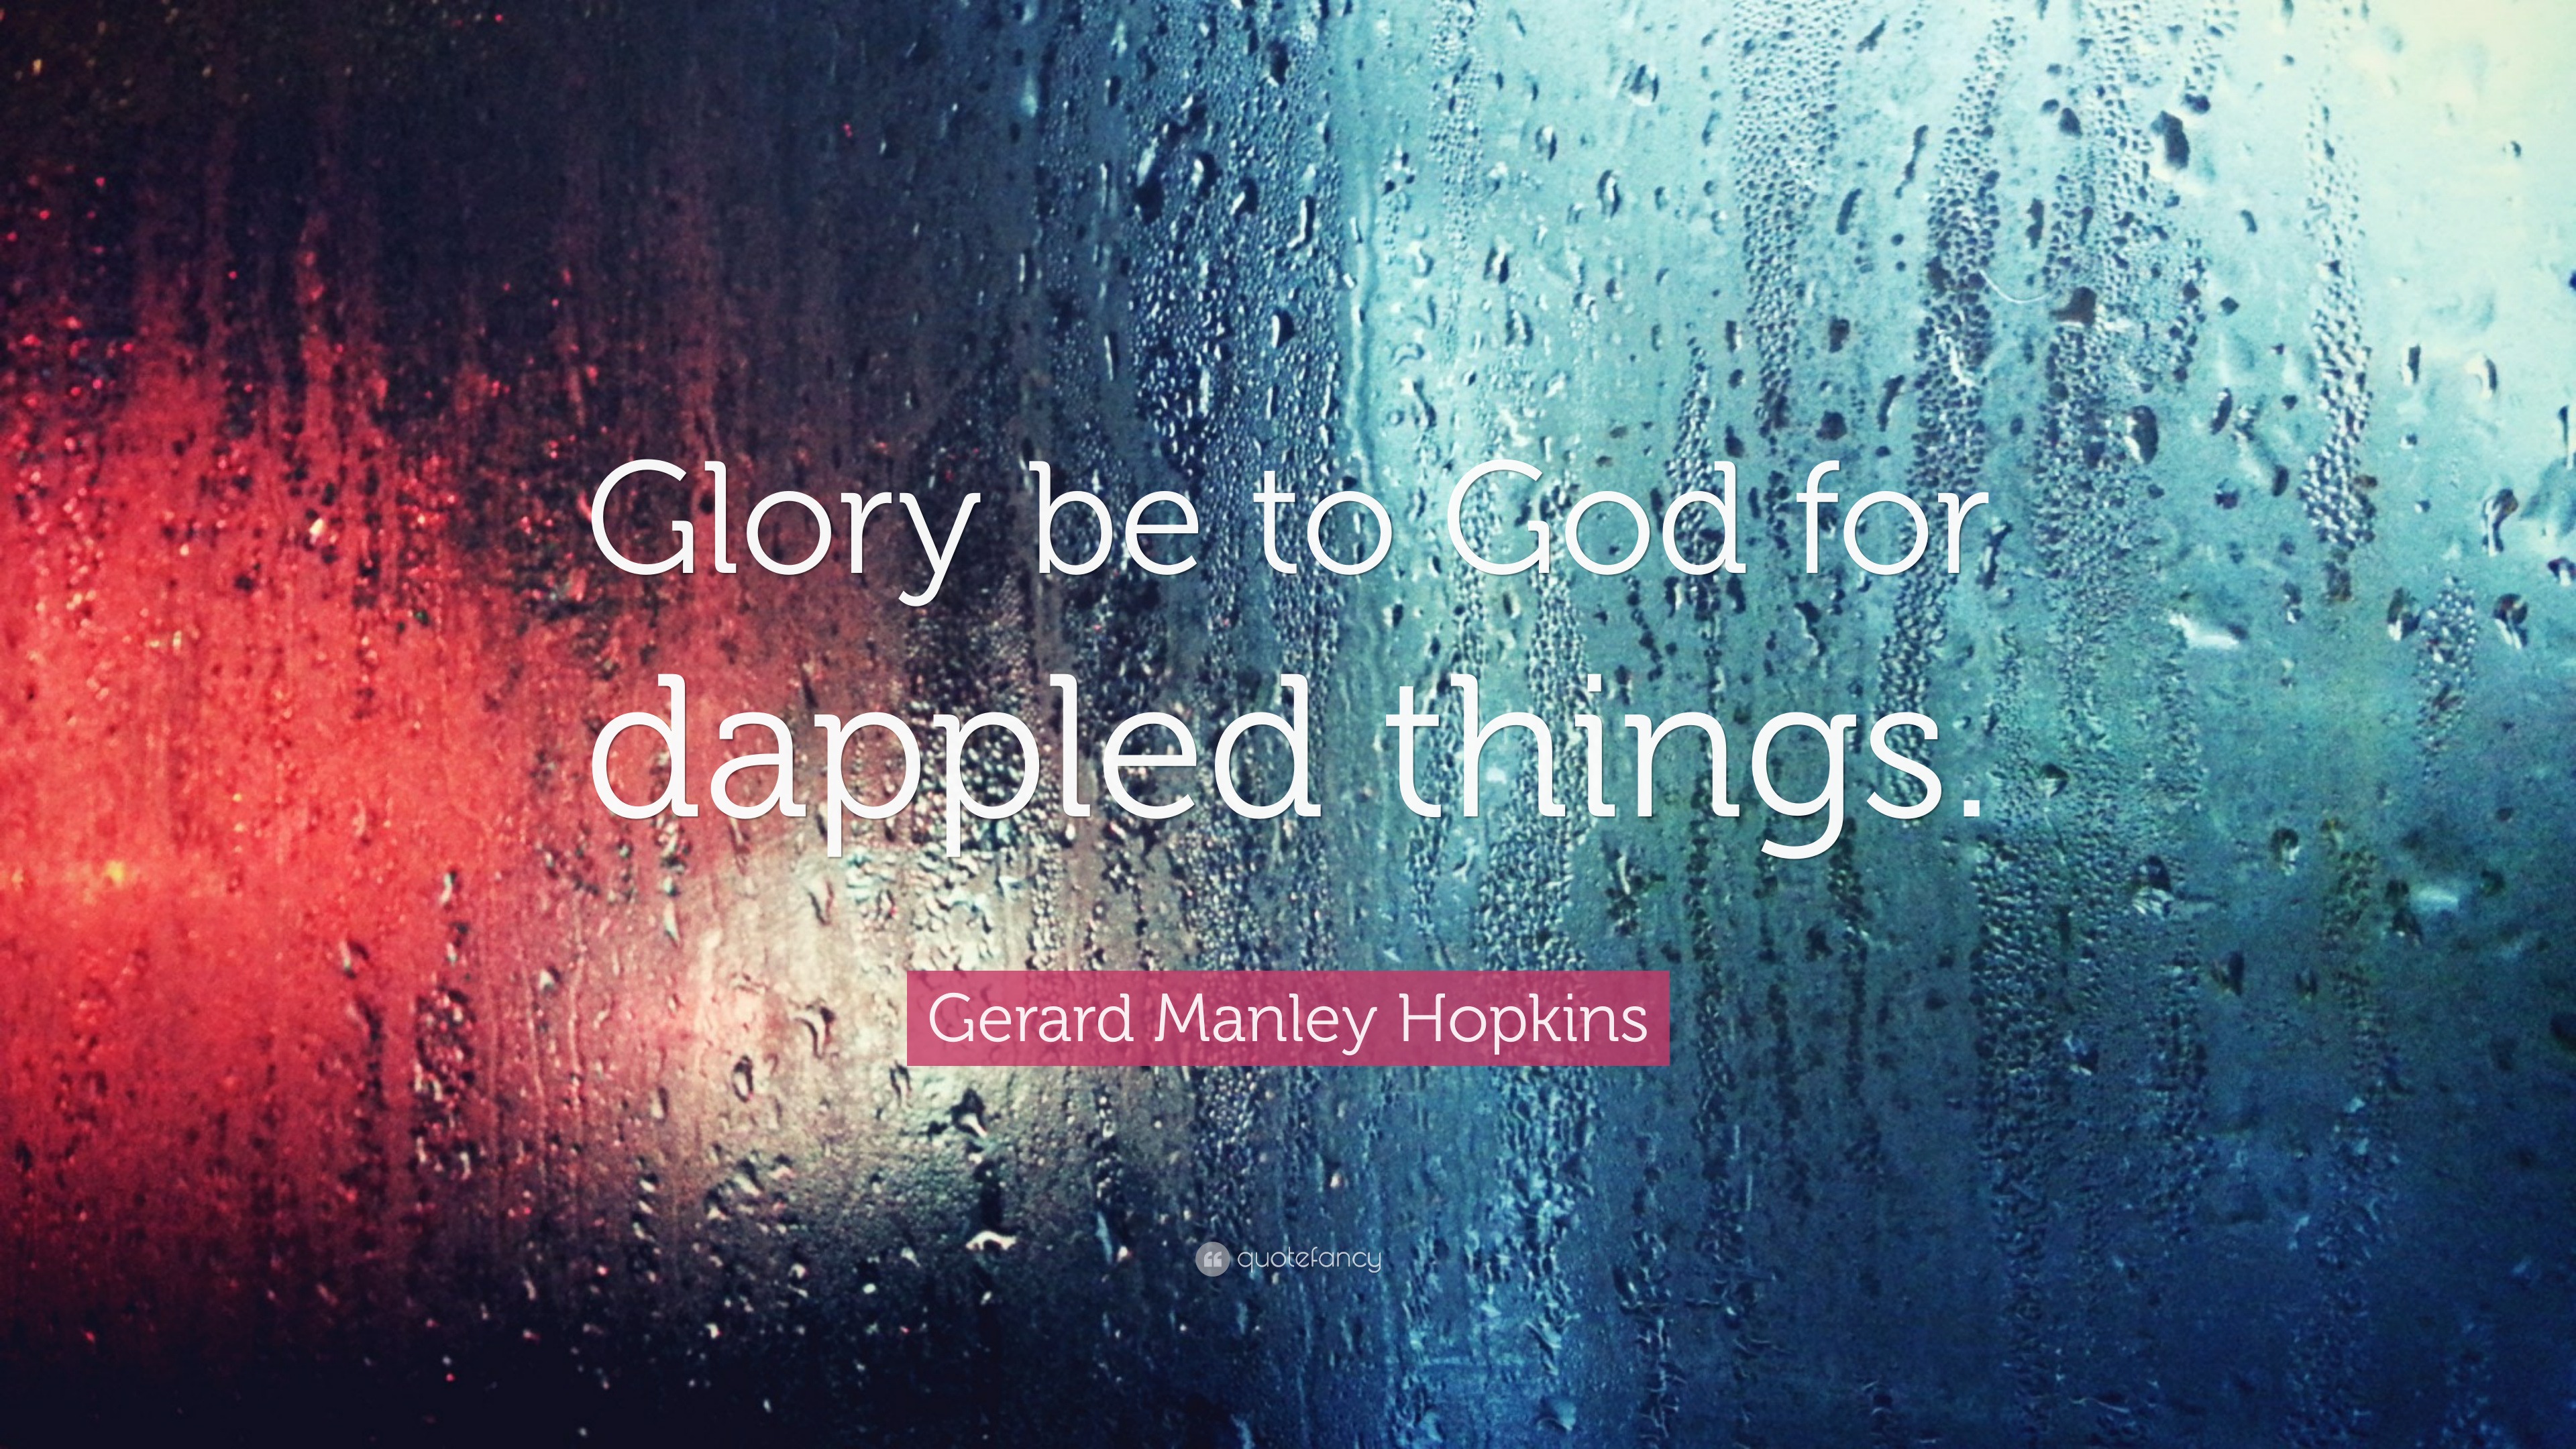 Gerard Manley Hopkins Quote: “Glory be to God for dappled things.” (7